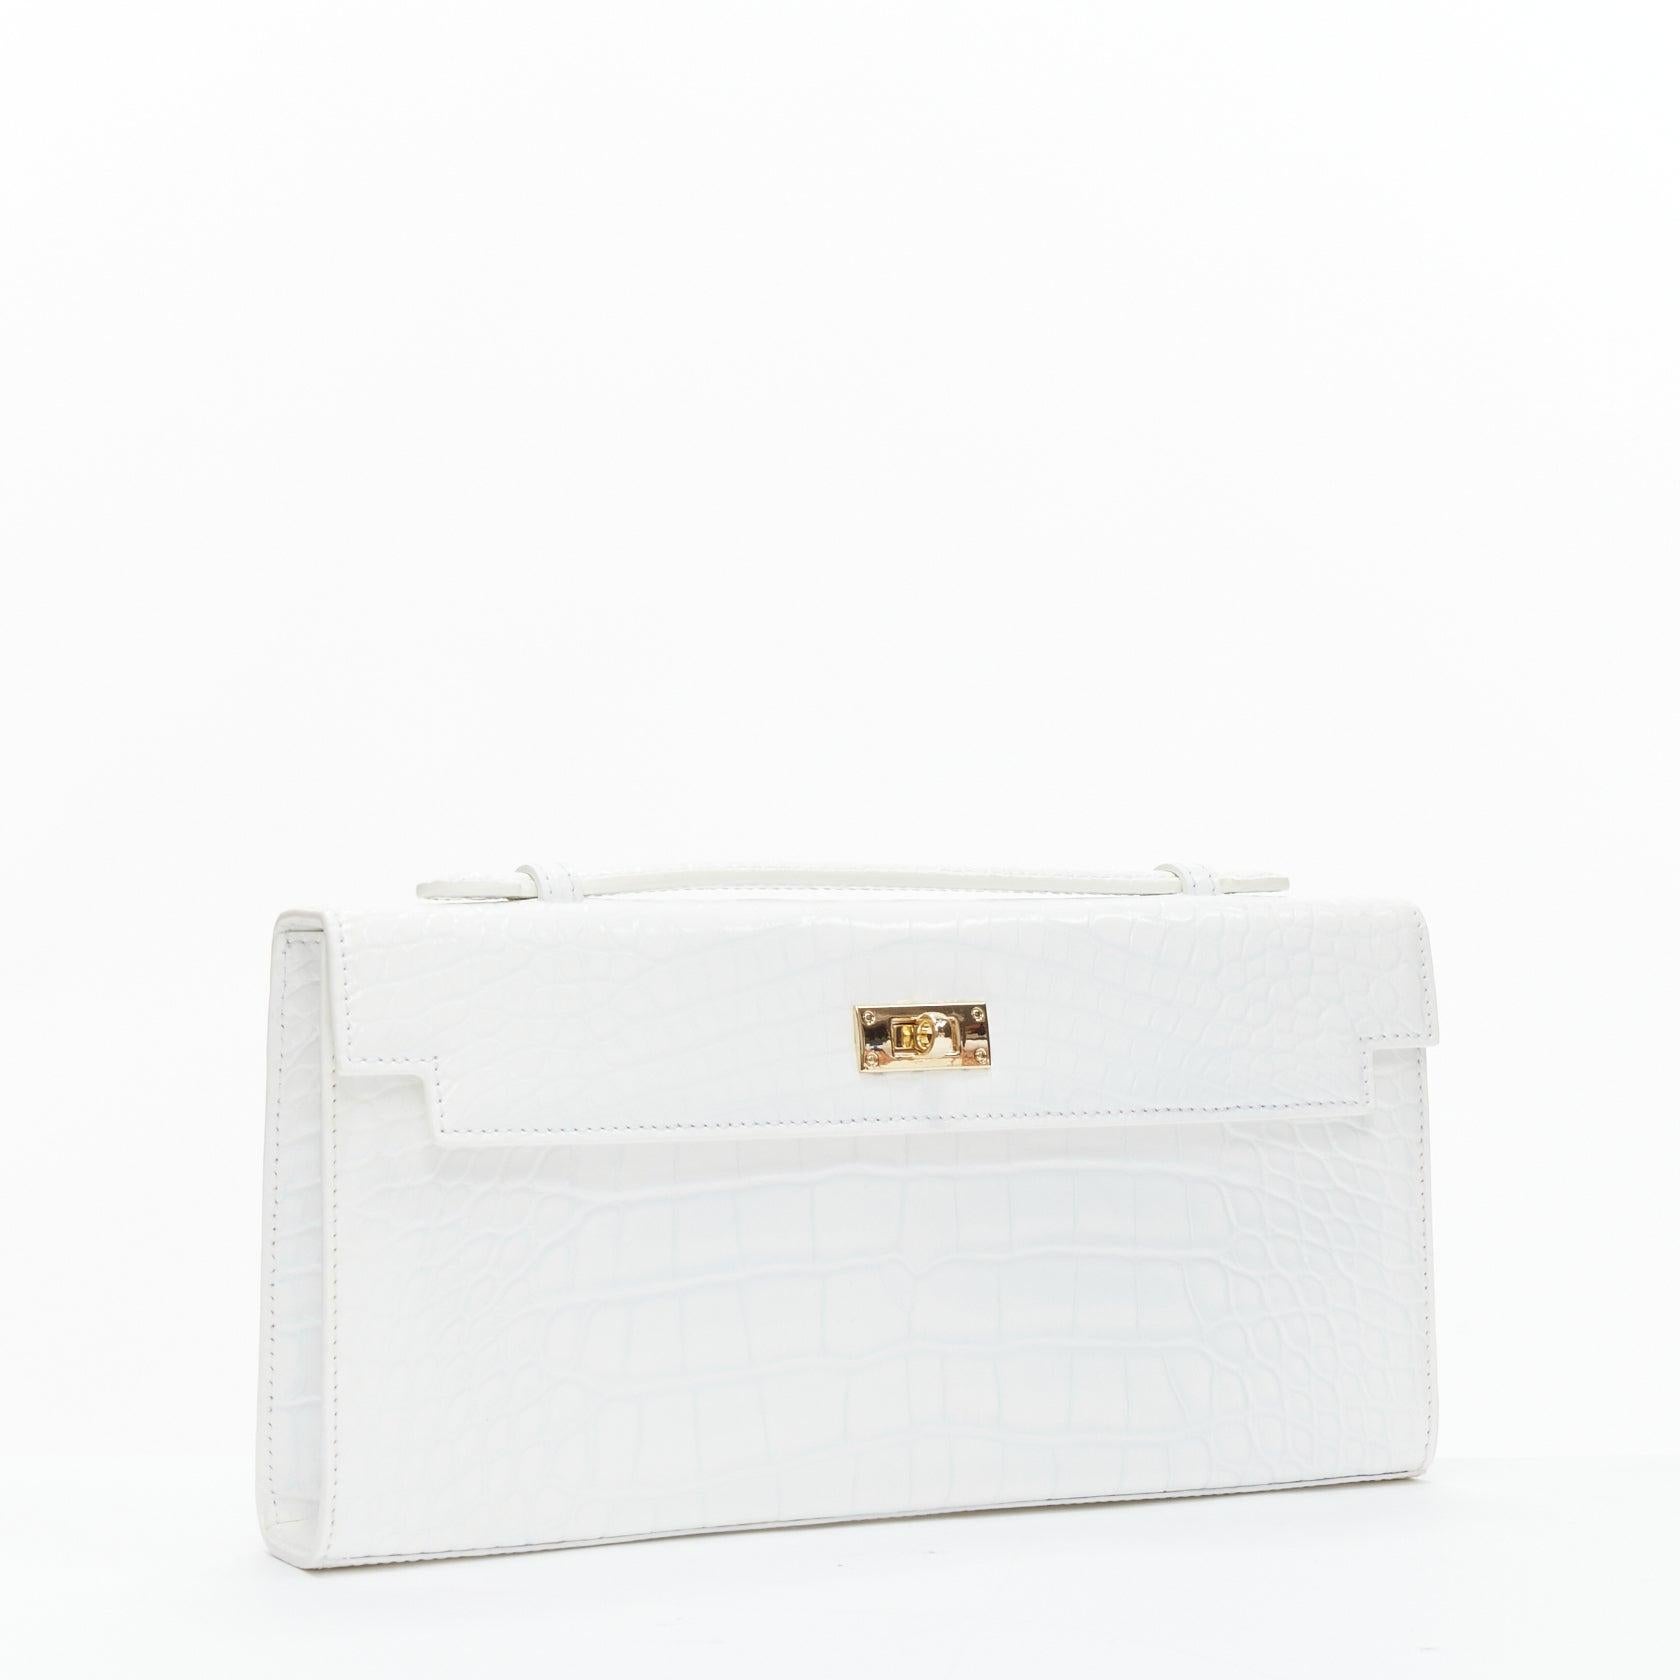 FERIDA YANG Bespoke white matte scaled leather gold buckle long flap clutch In Excellent Condition For Sale In Hong Kong, NT